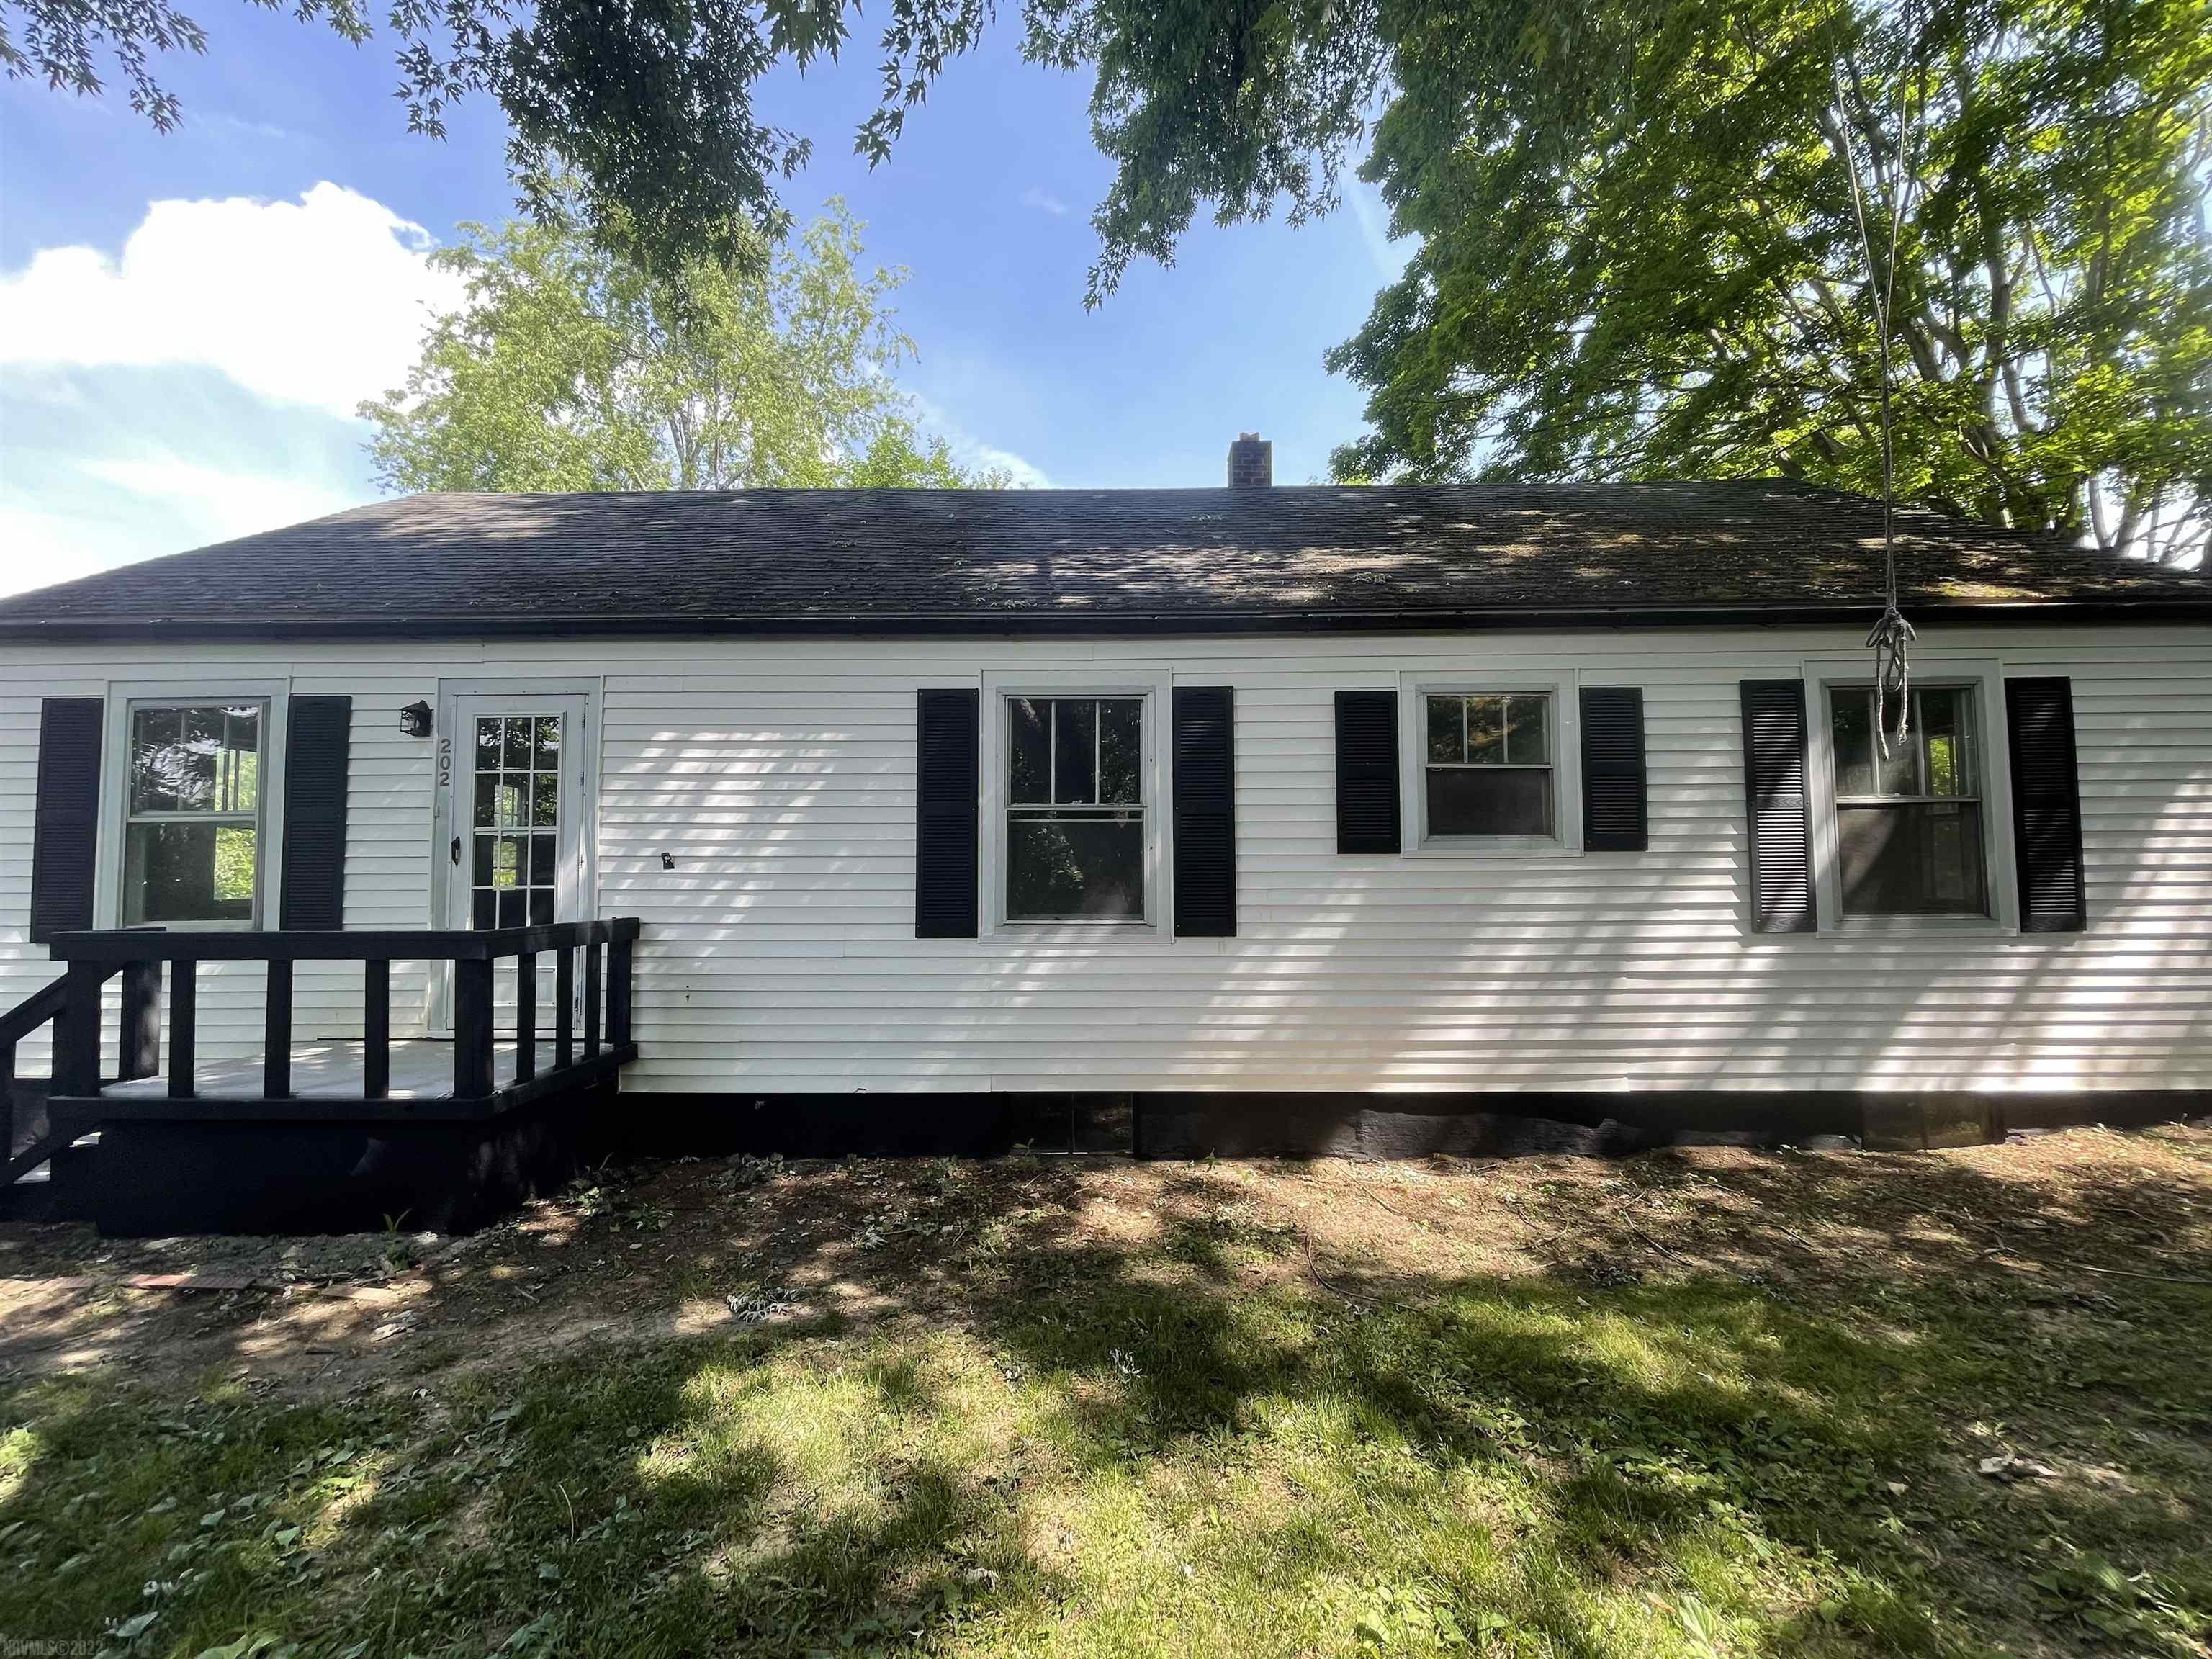 Beautiful Move In Ready 2 Bed 2 Bath Home in Christiansburg.... This Home has Been Freshly Painted with Refinished Oak Hardwood Flooring Throughout.. The Home Has a Heat Pump and a Nice Yard.. Come Check out this Home Before its Gone....